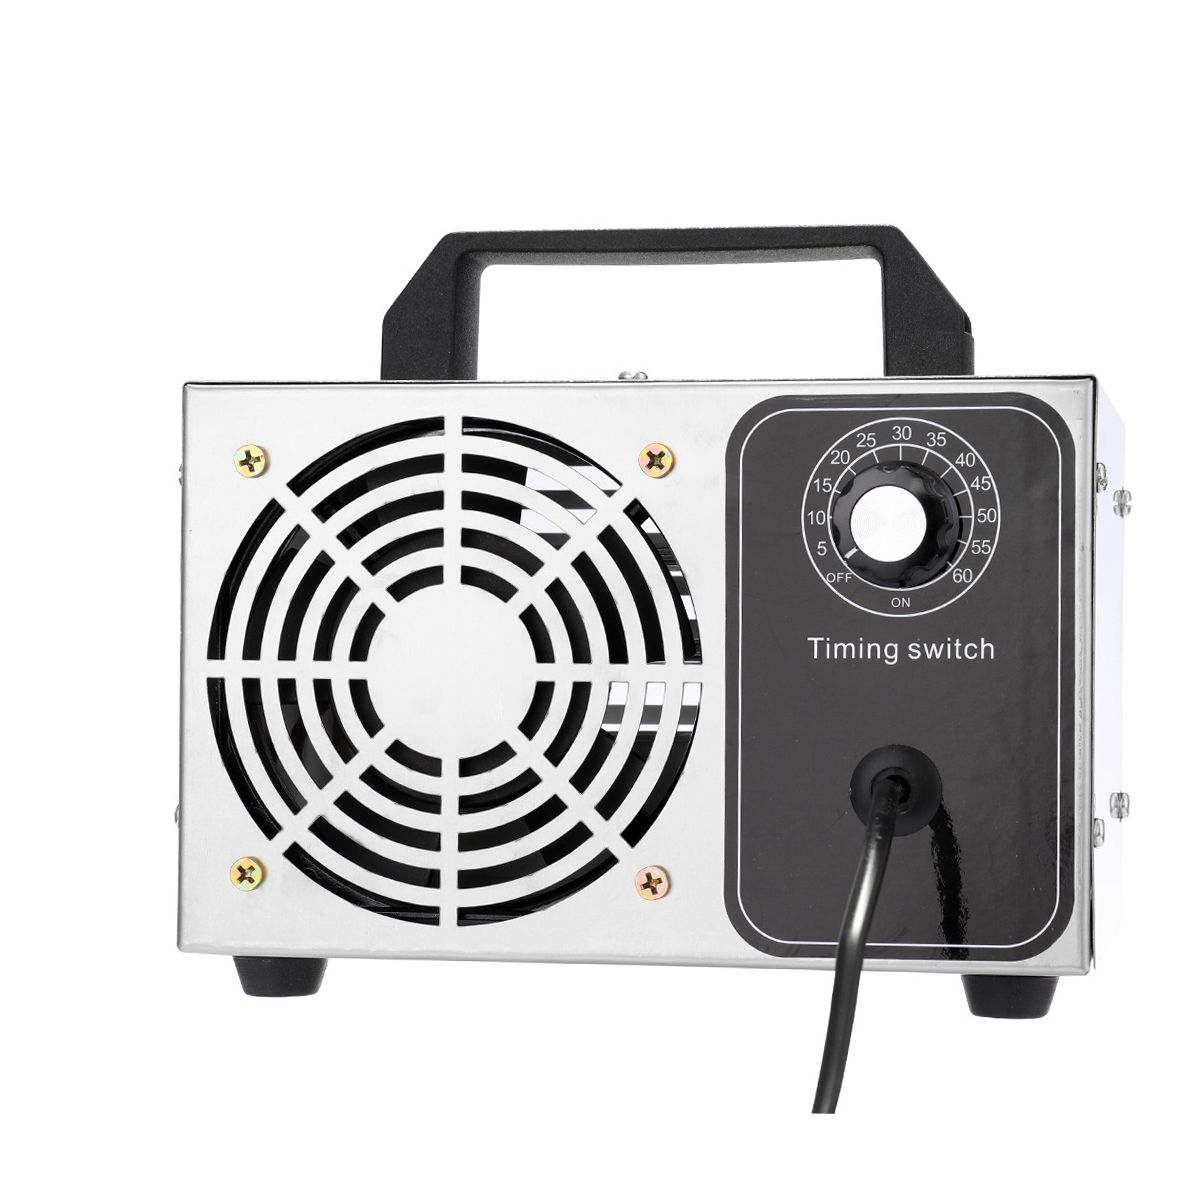 220V-24gh-TimingSwitch-Ozone-Air-Purifier-Ozone-Generator-Home-Cleaning-Machine-1695010